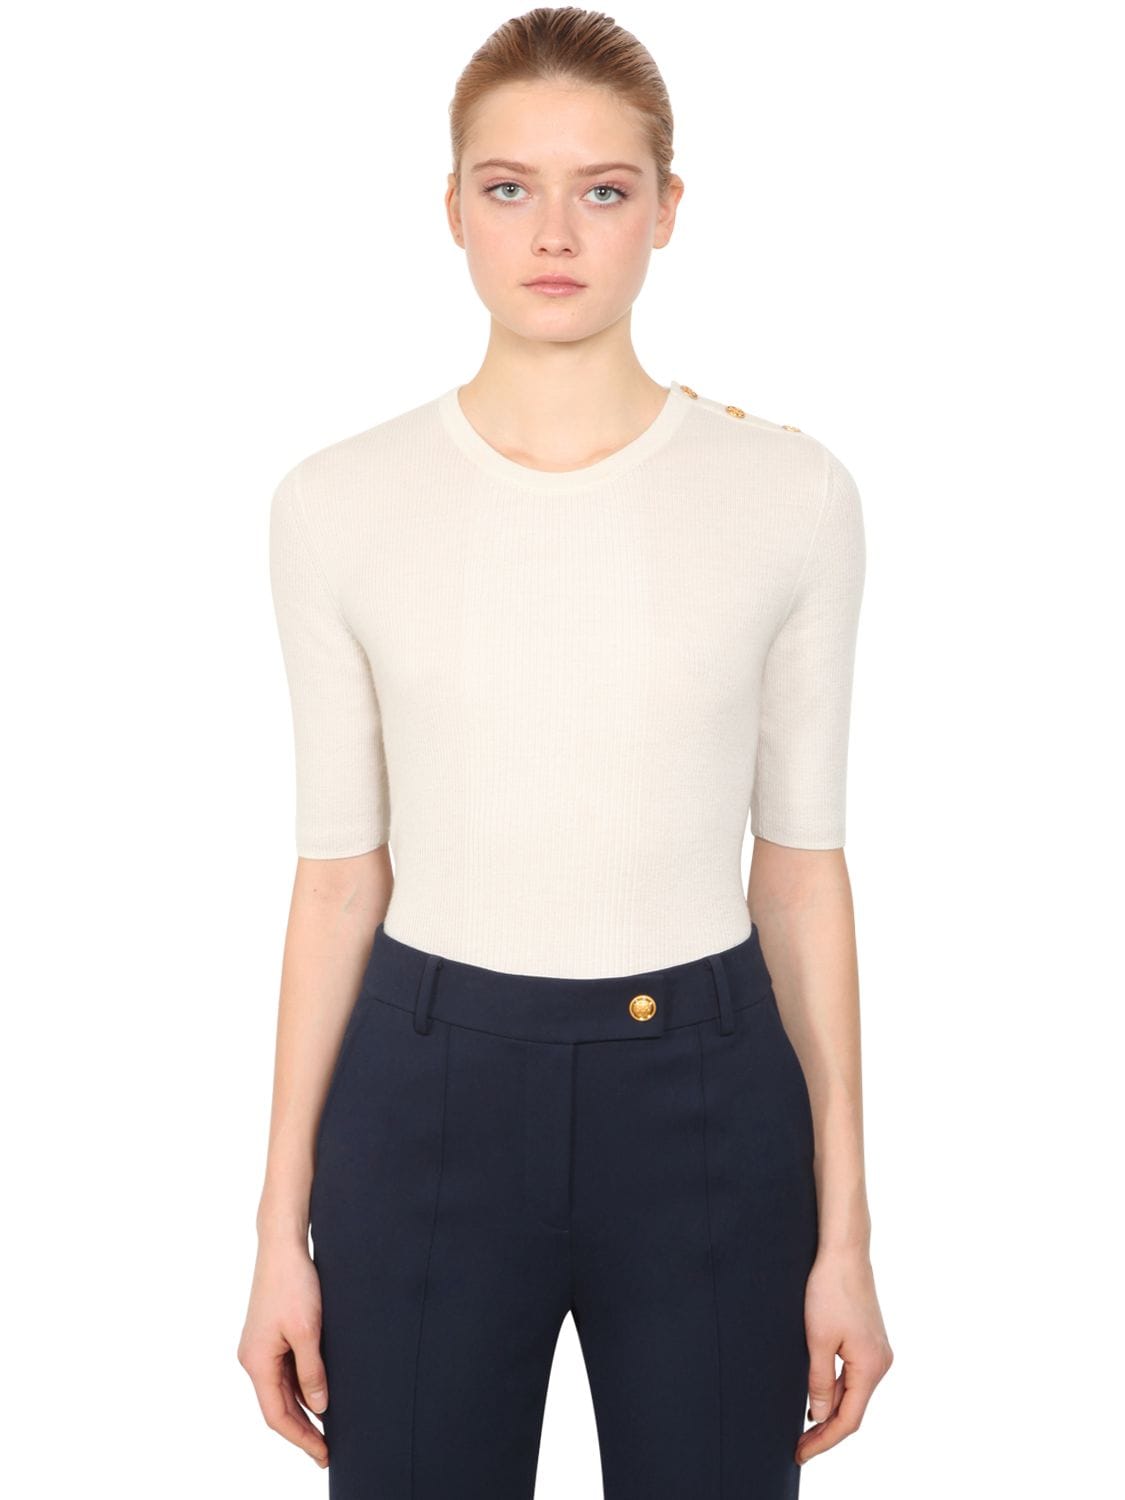 Tory Burch Short Sleeve Cashmere Knit Jumper In Ivory